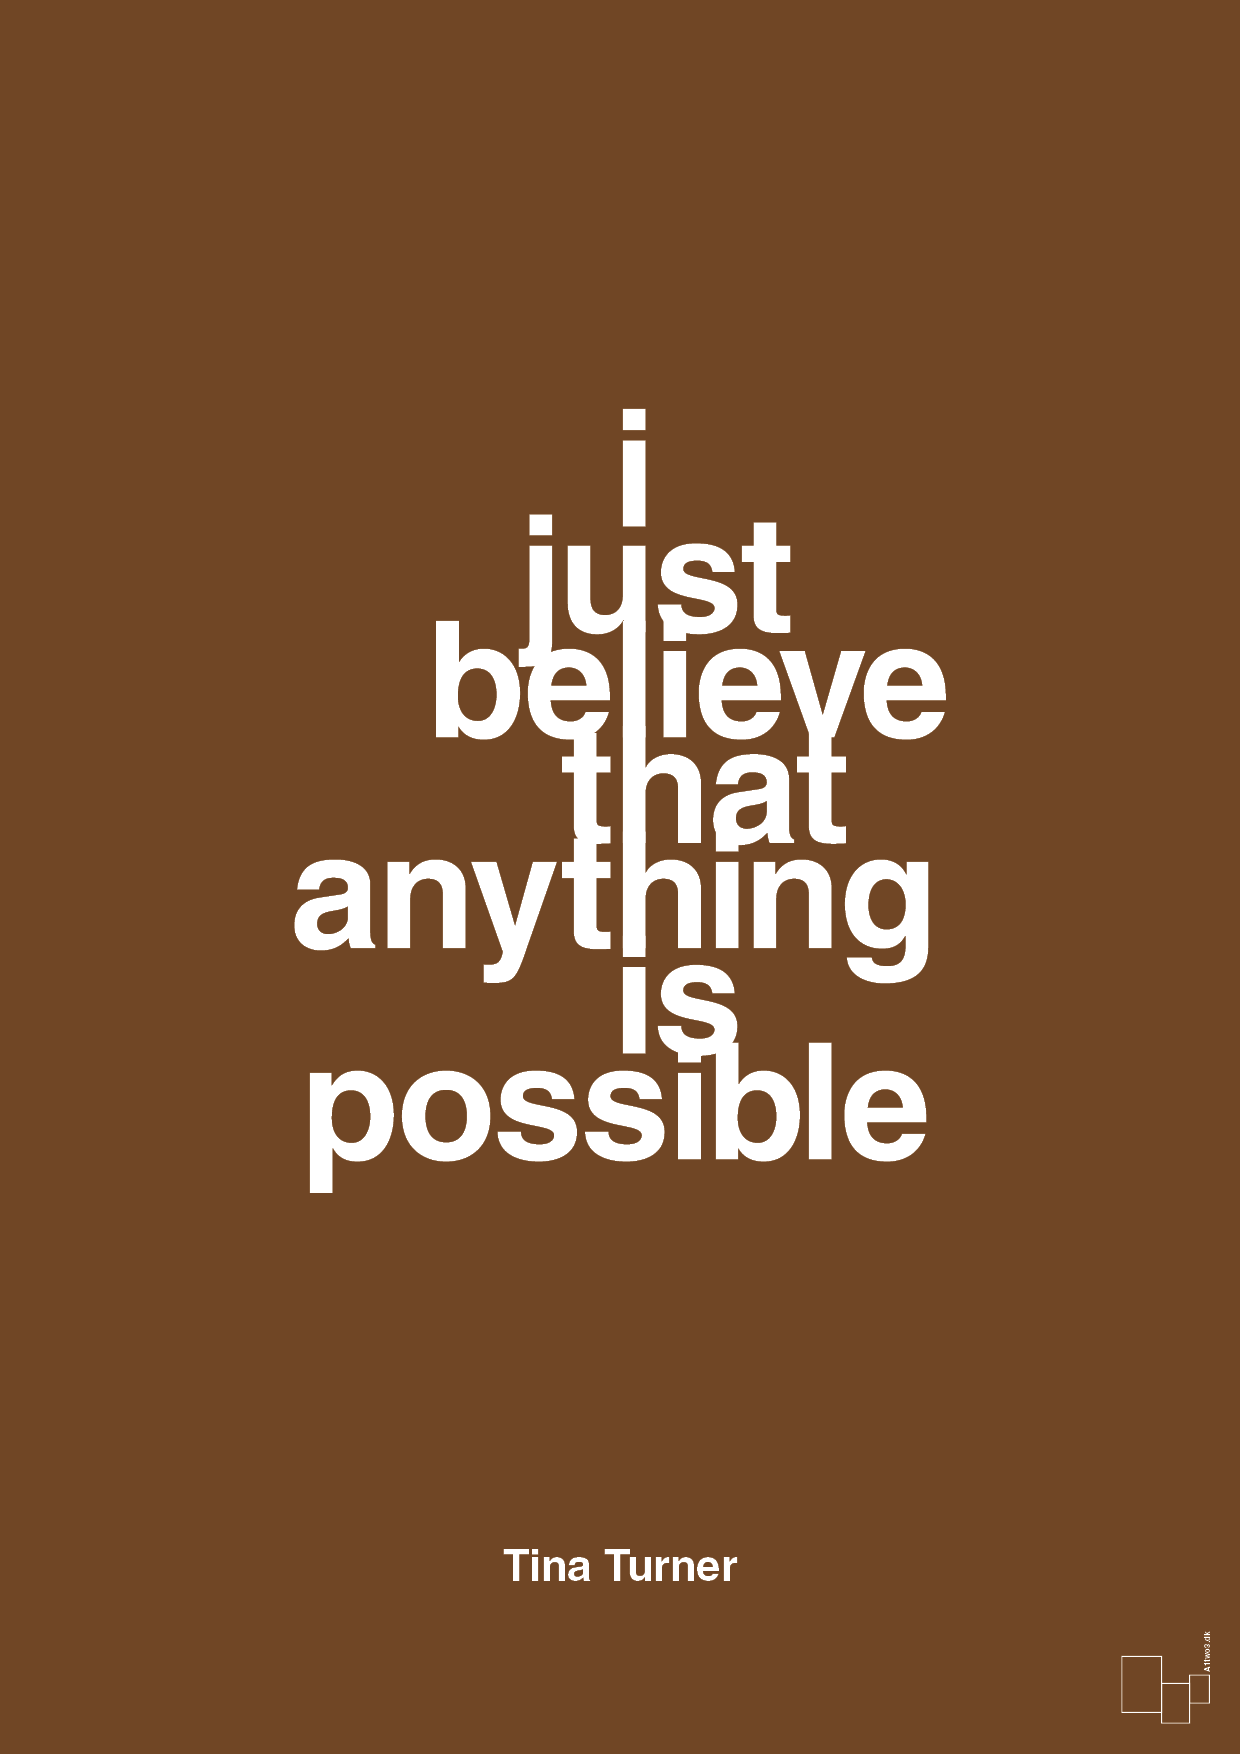 i just believe that anything is possible - Plakat med Citater i Dark Brown